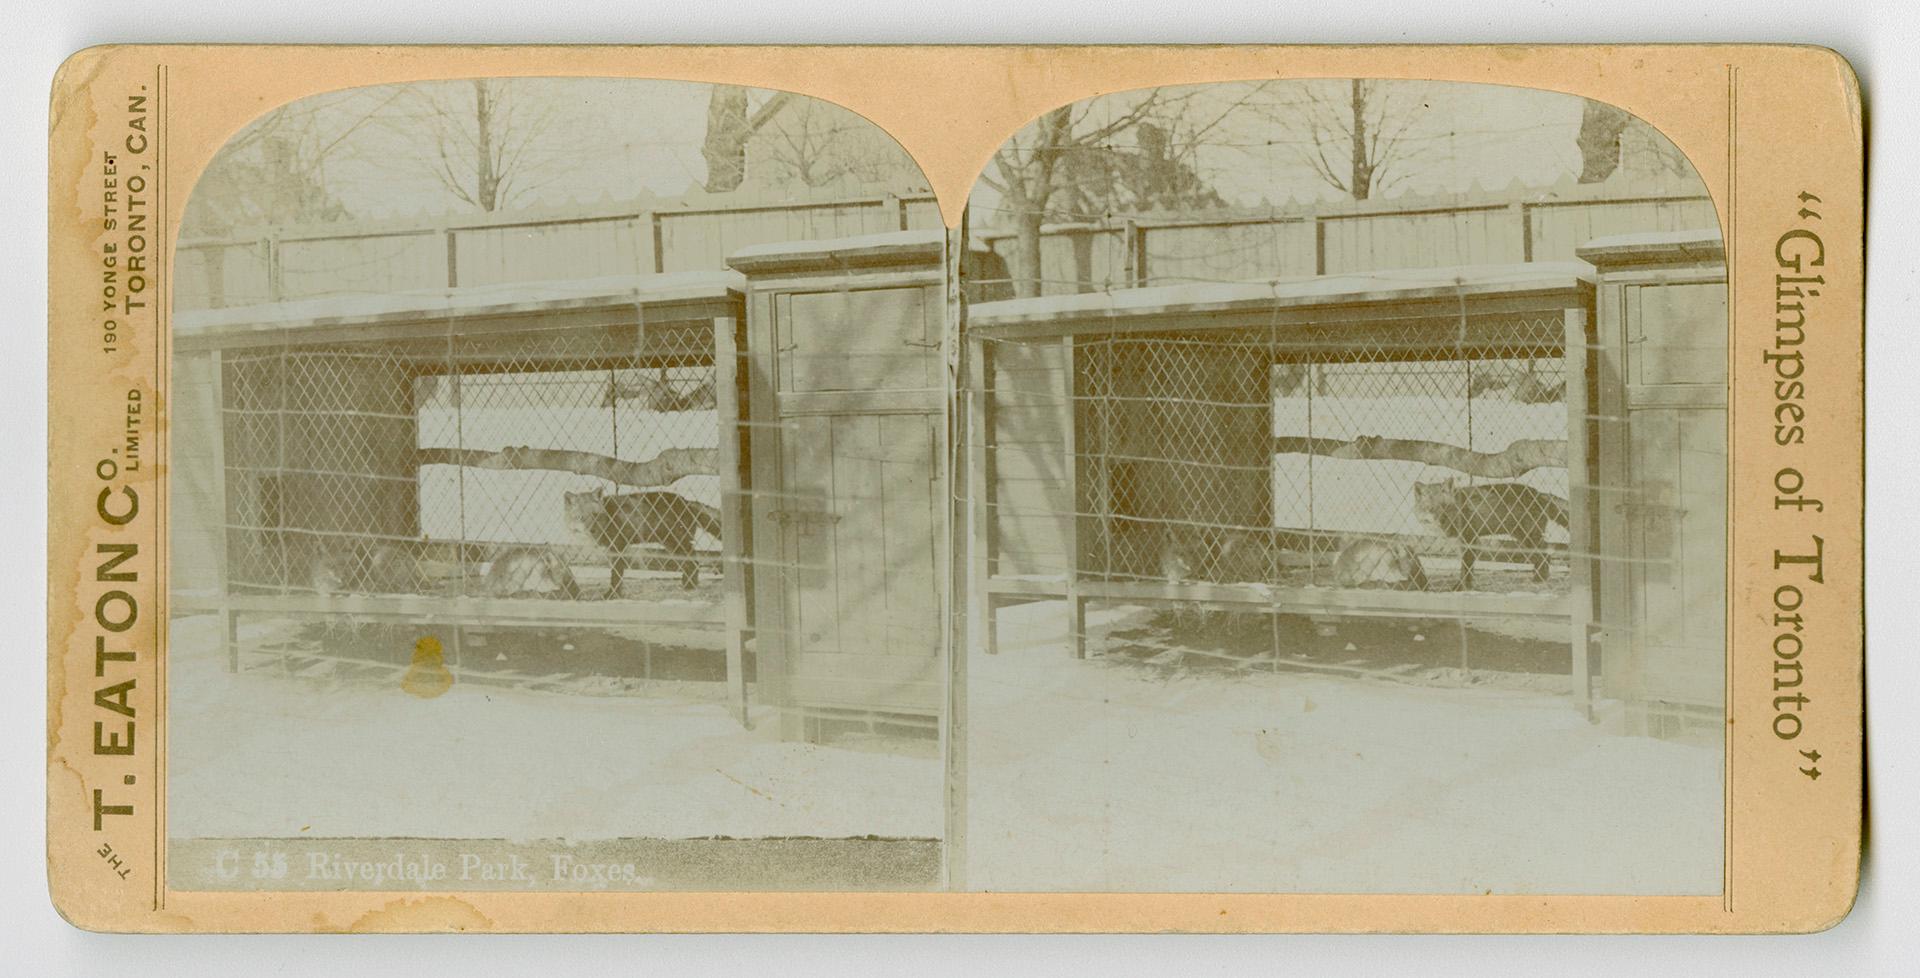 Pictures show four foxes in a cage in wintertime.